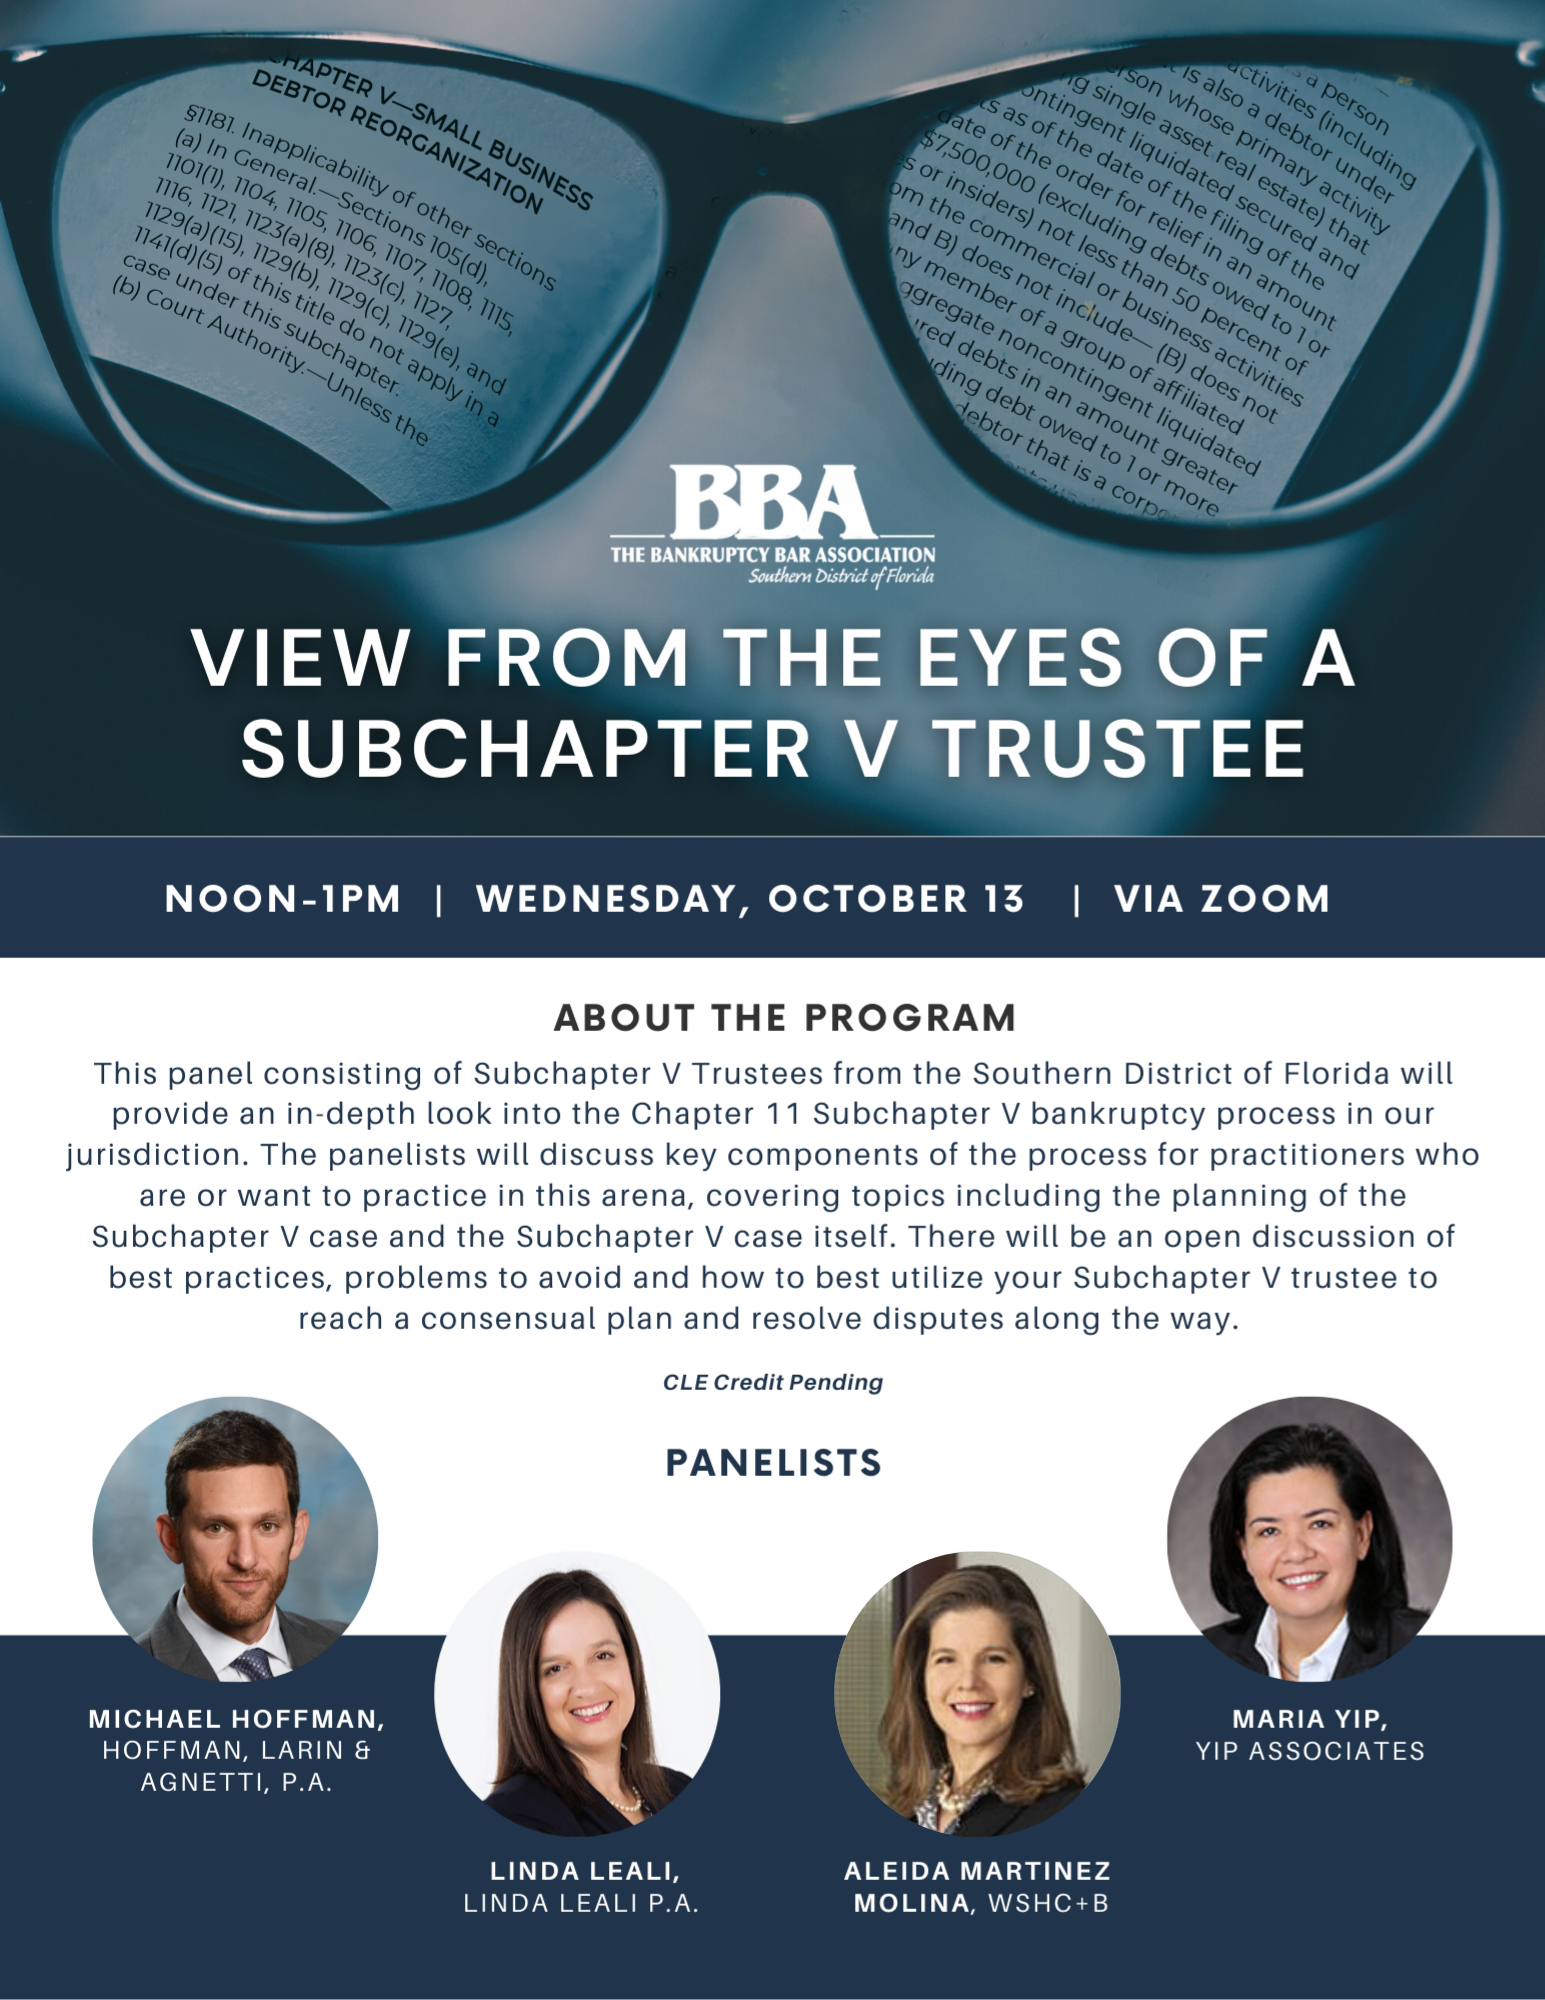 View From the Eyes of a Subchapter V Trustee